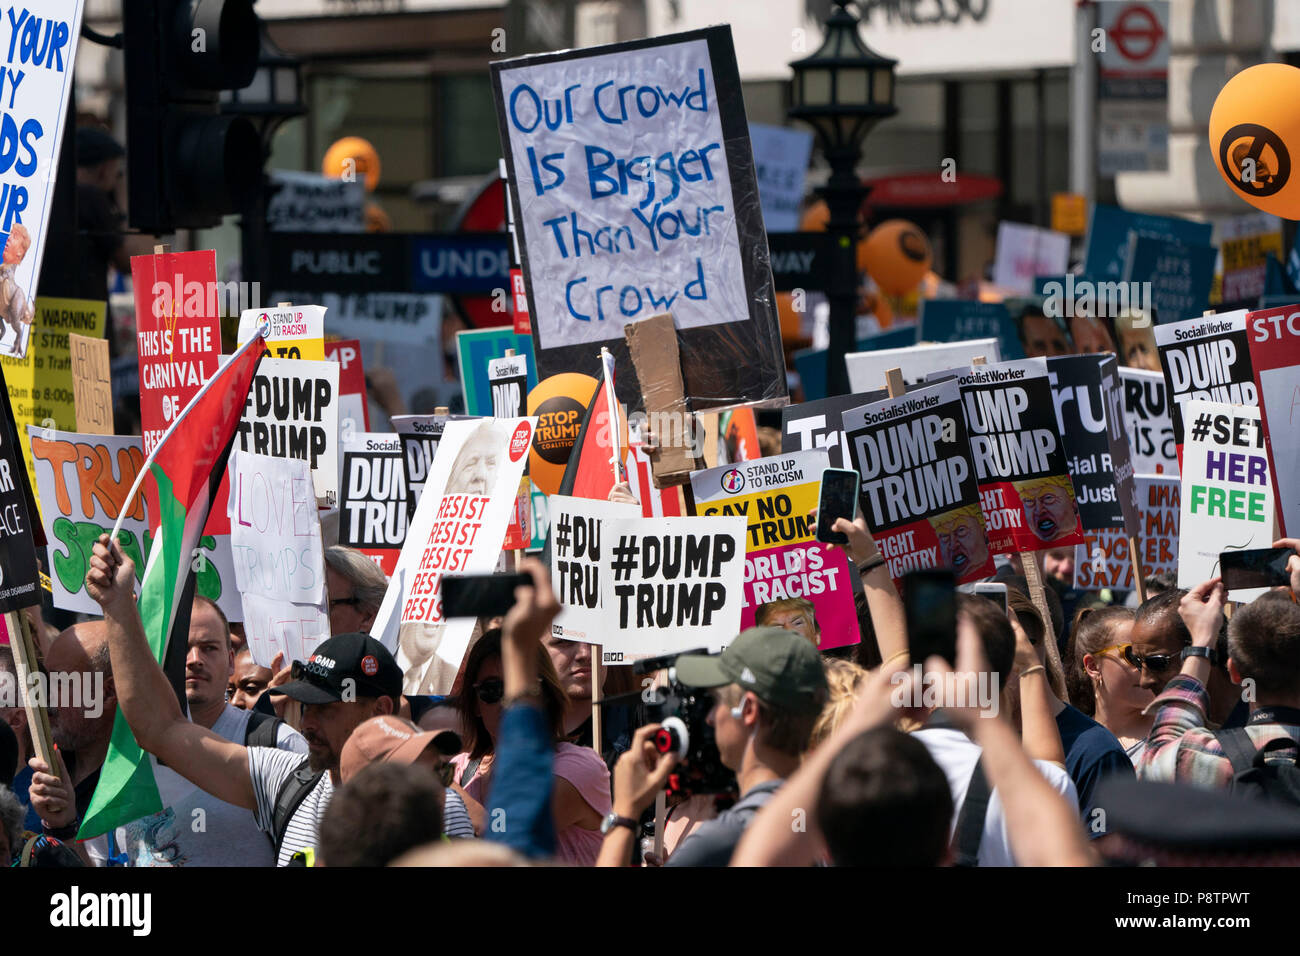 LONDON - JULY 13: A protest march against the visit to the UK by US President, Donald Trump, passes through Central London on July 13, 2018,. Photo by David Levenson Credit: David Levenson/Alamy Live News Credit: David Levenson/Alamy Live News Stock Photo